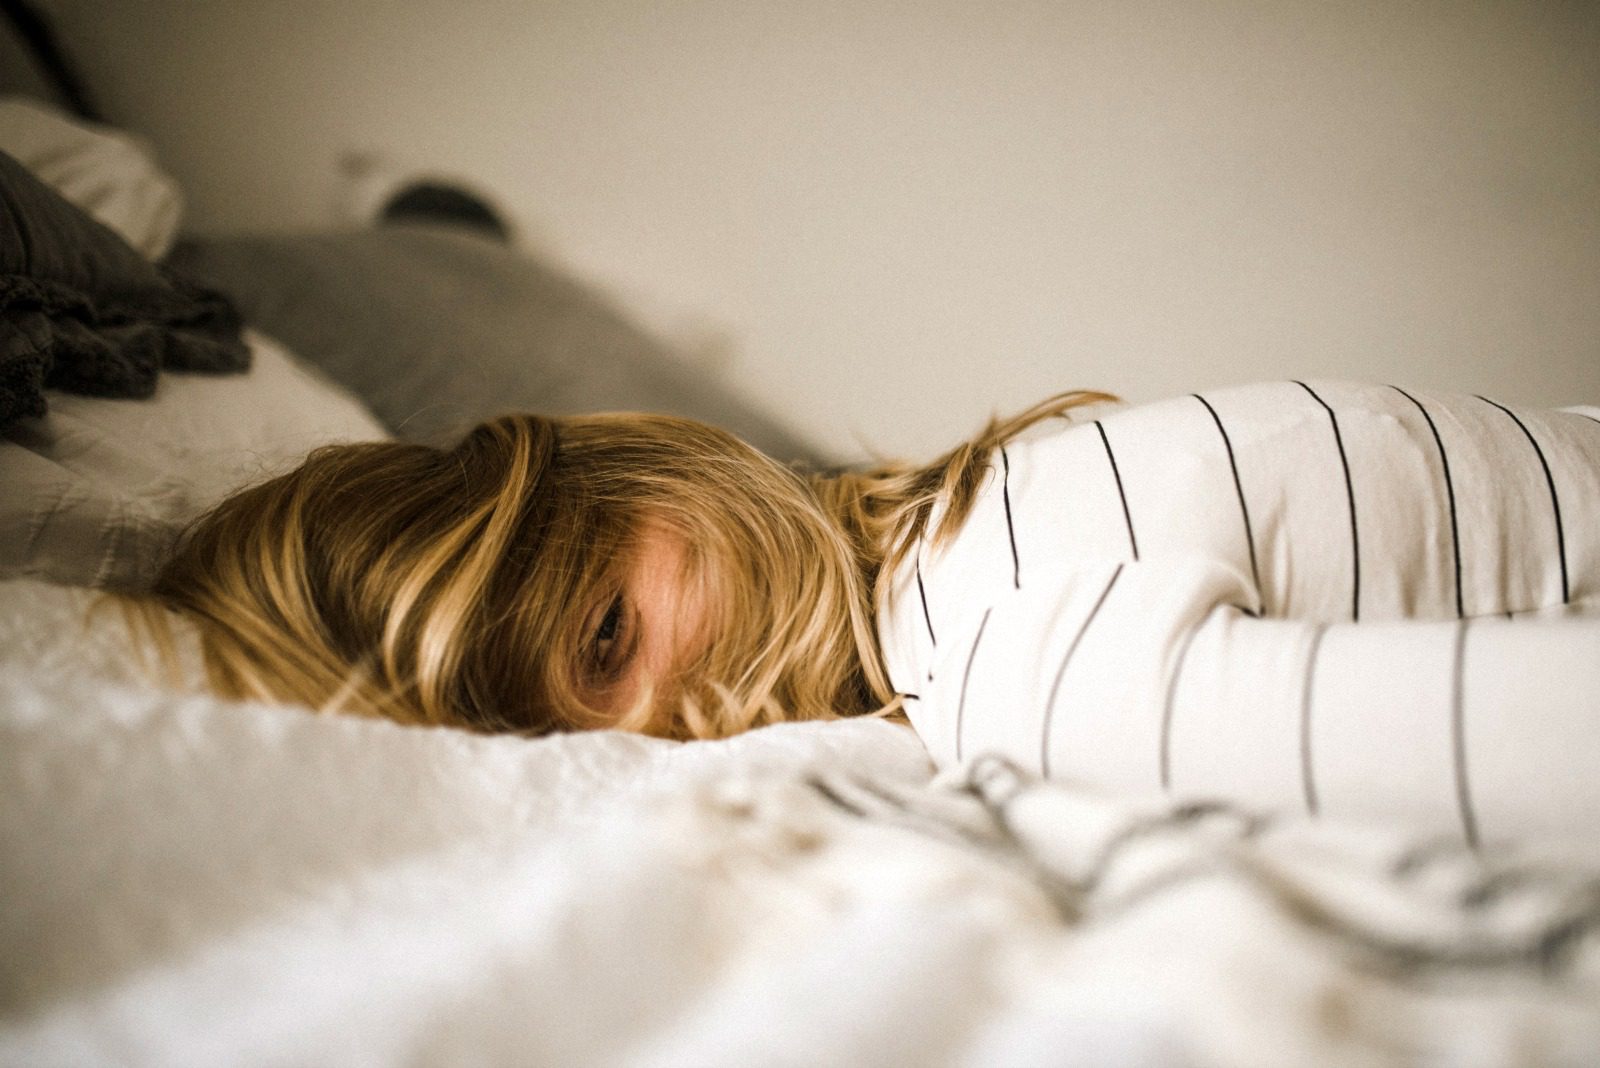 Here's what to do when you wake up in the middle of the night